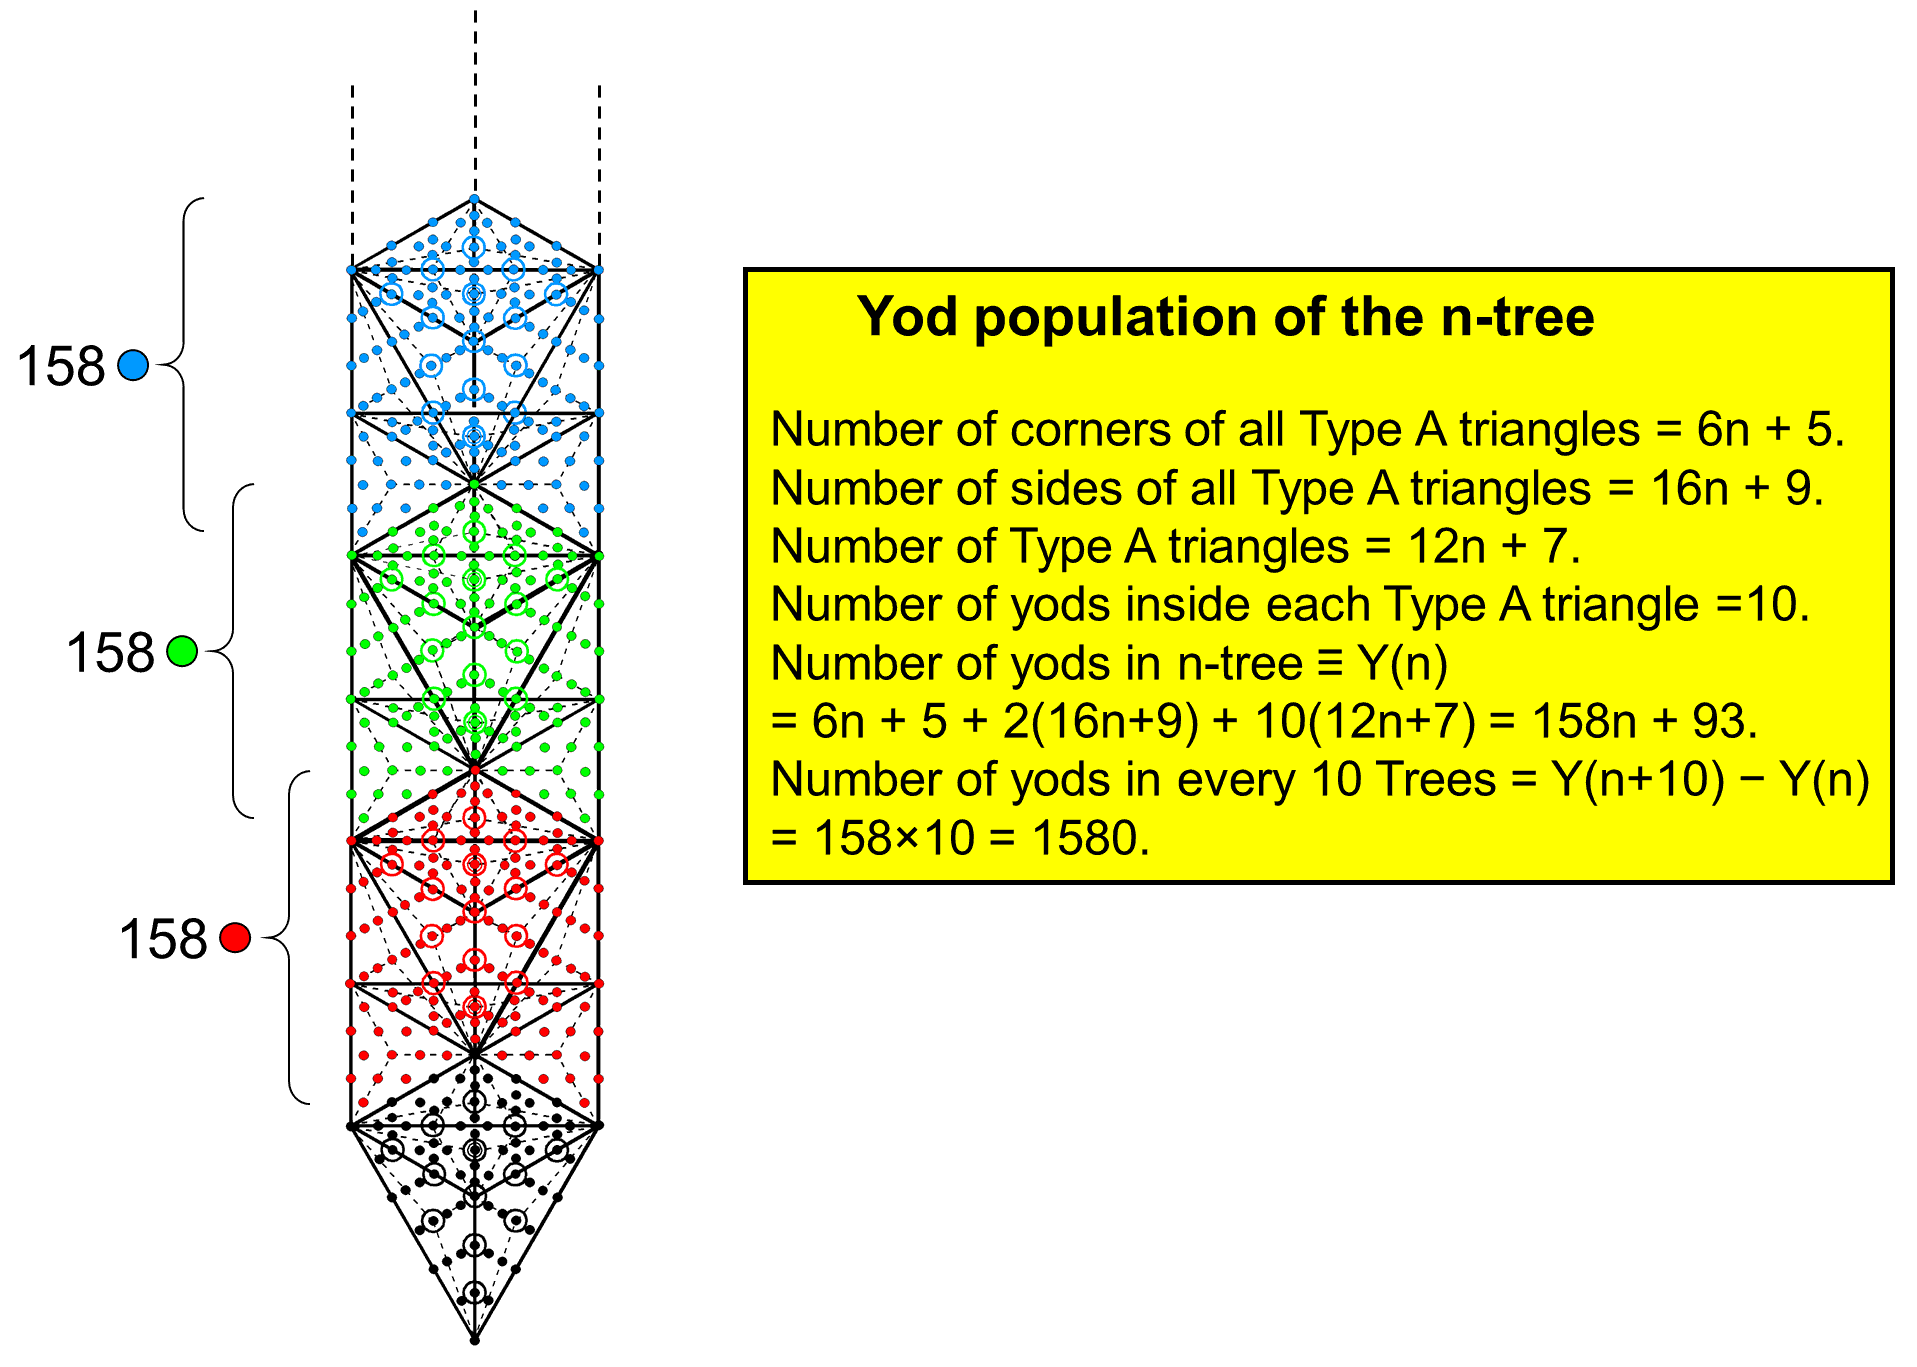 1580 yods in every 10 Trees of Life